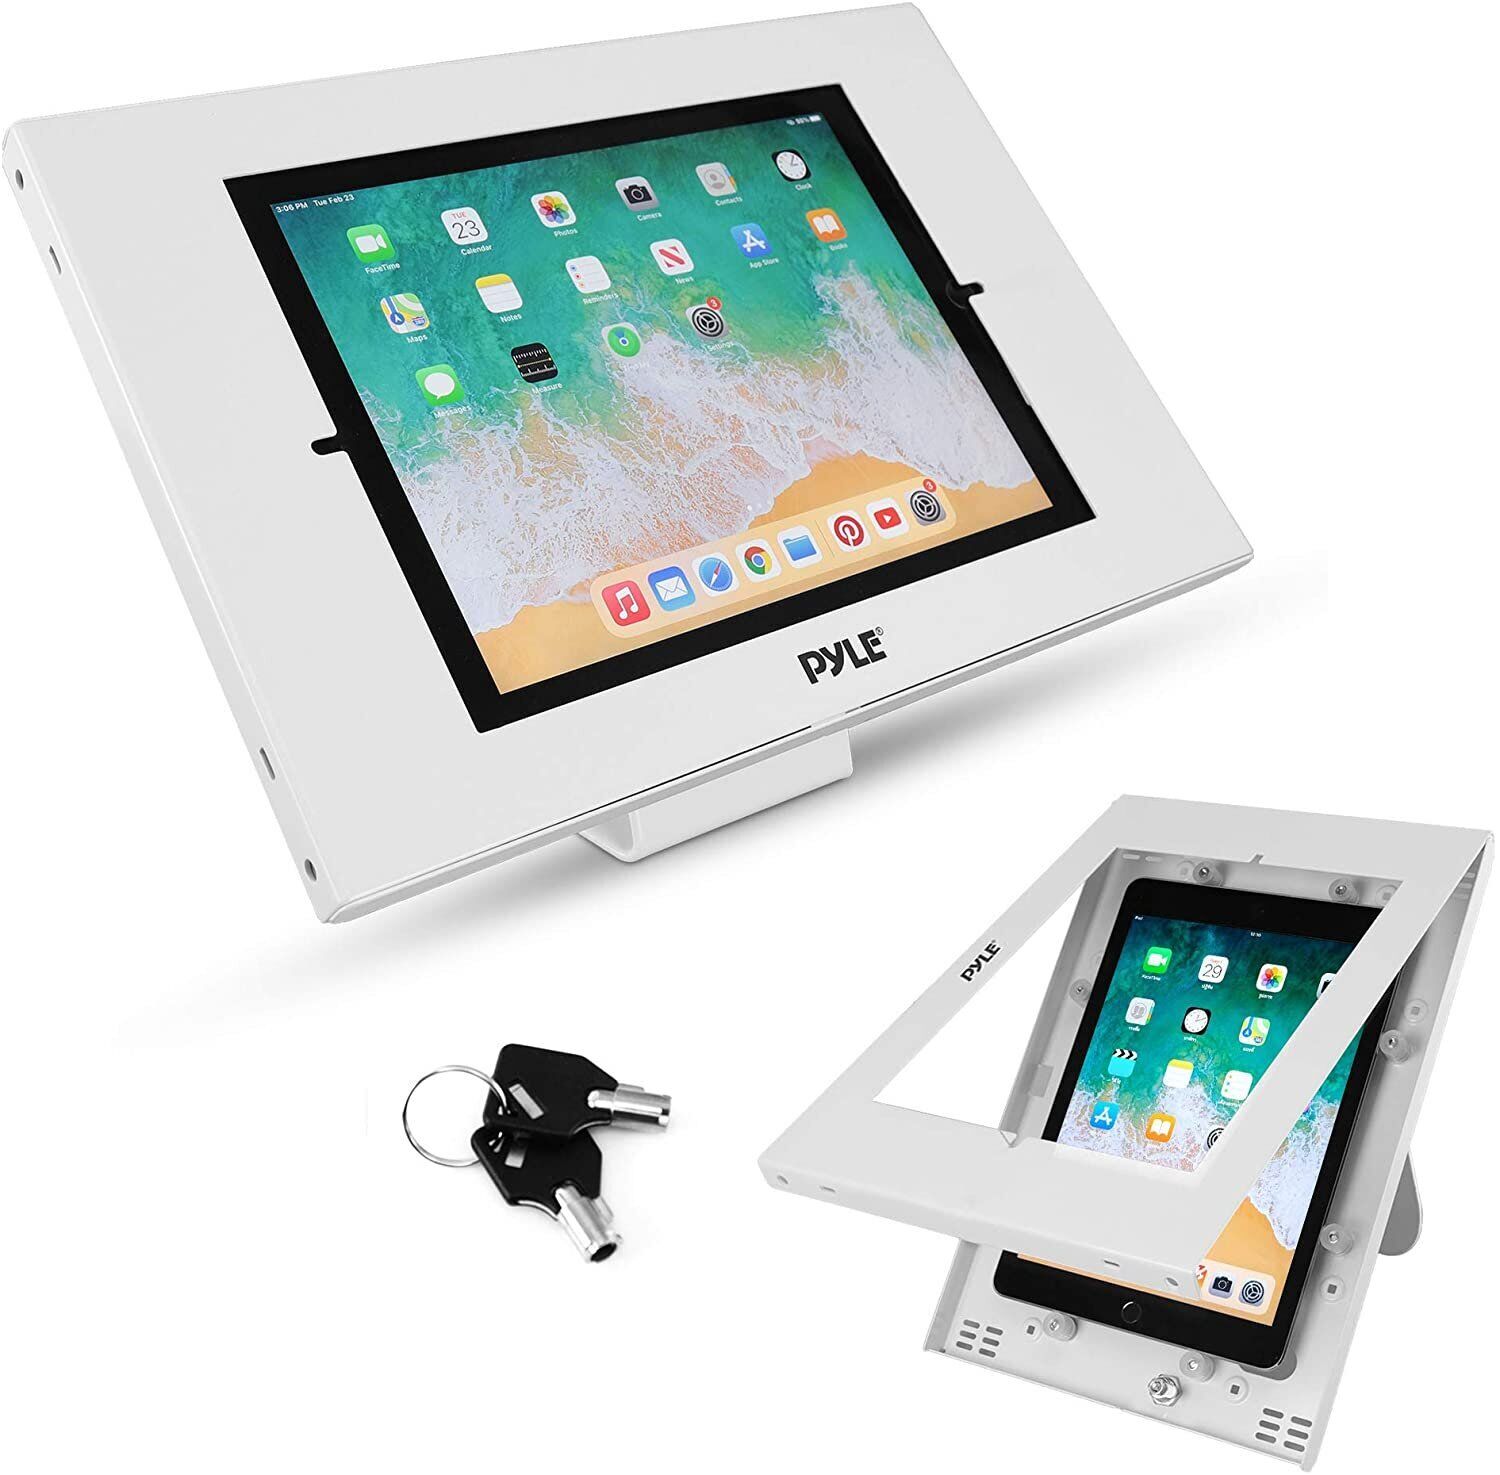 Pyle Anti Theft Tablet Security Stand - Wall / Table Mount Desktop Ipad Stand